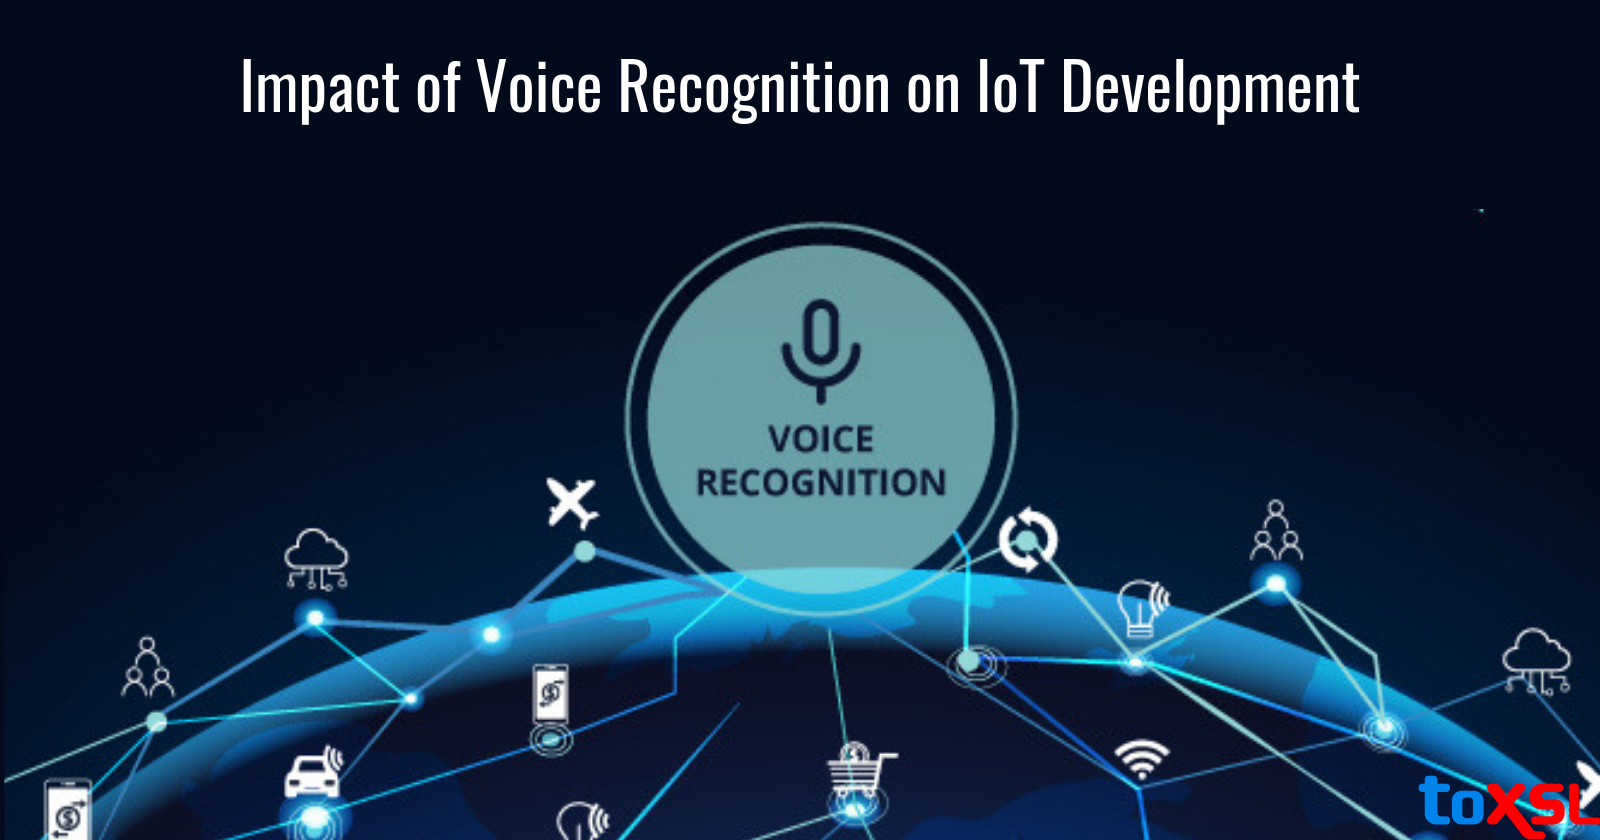 How Voice Recognition is Making an Impact on IoT Development